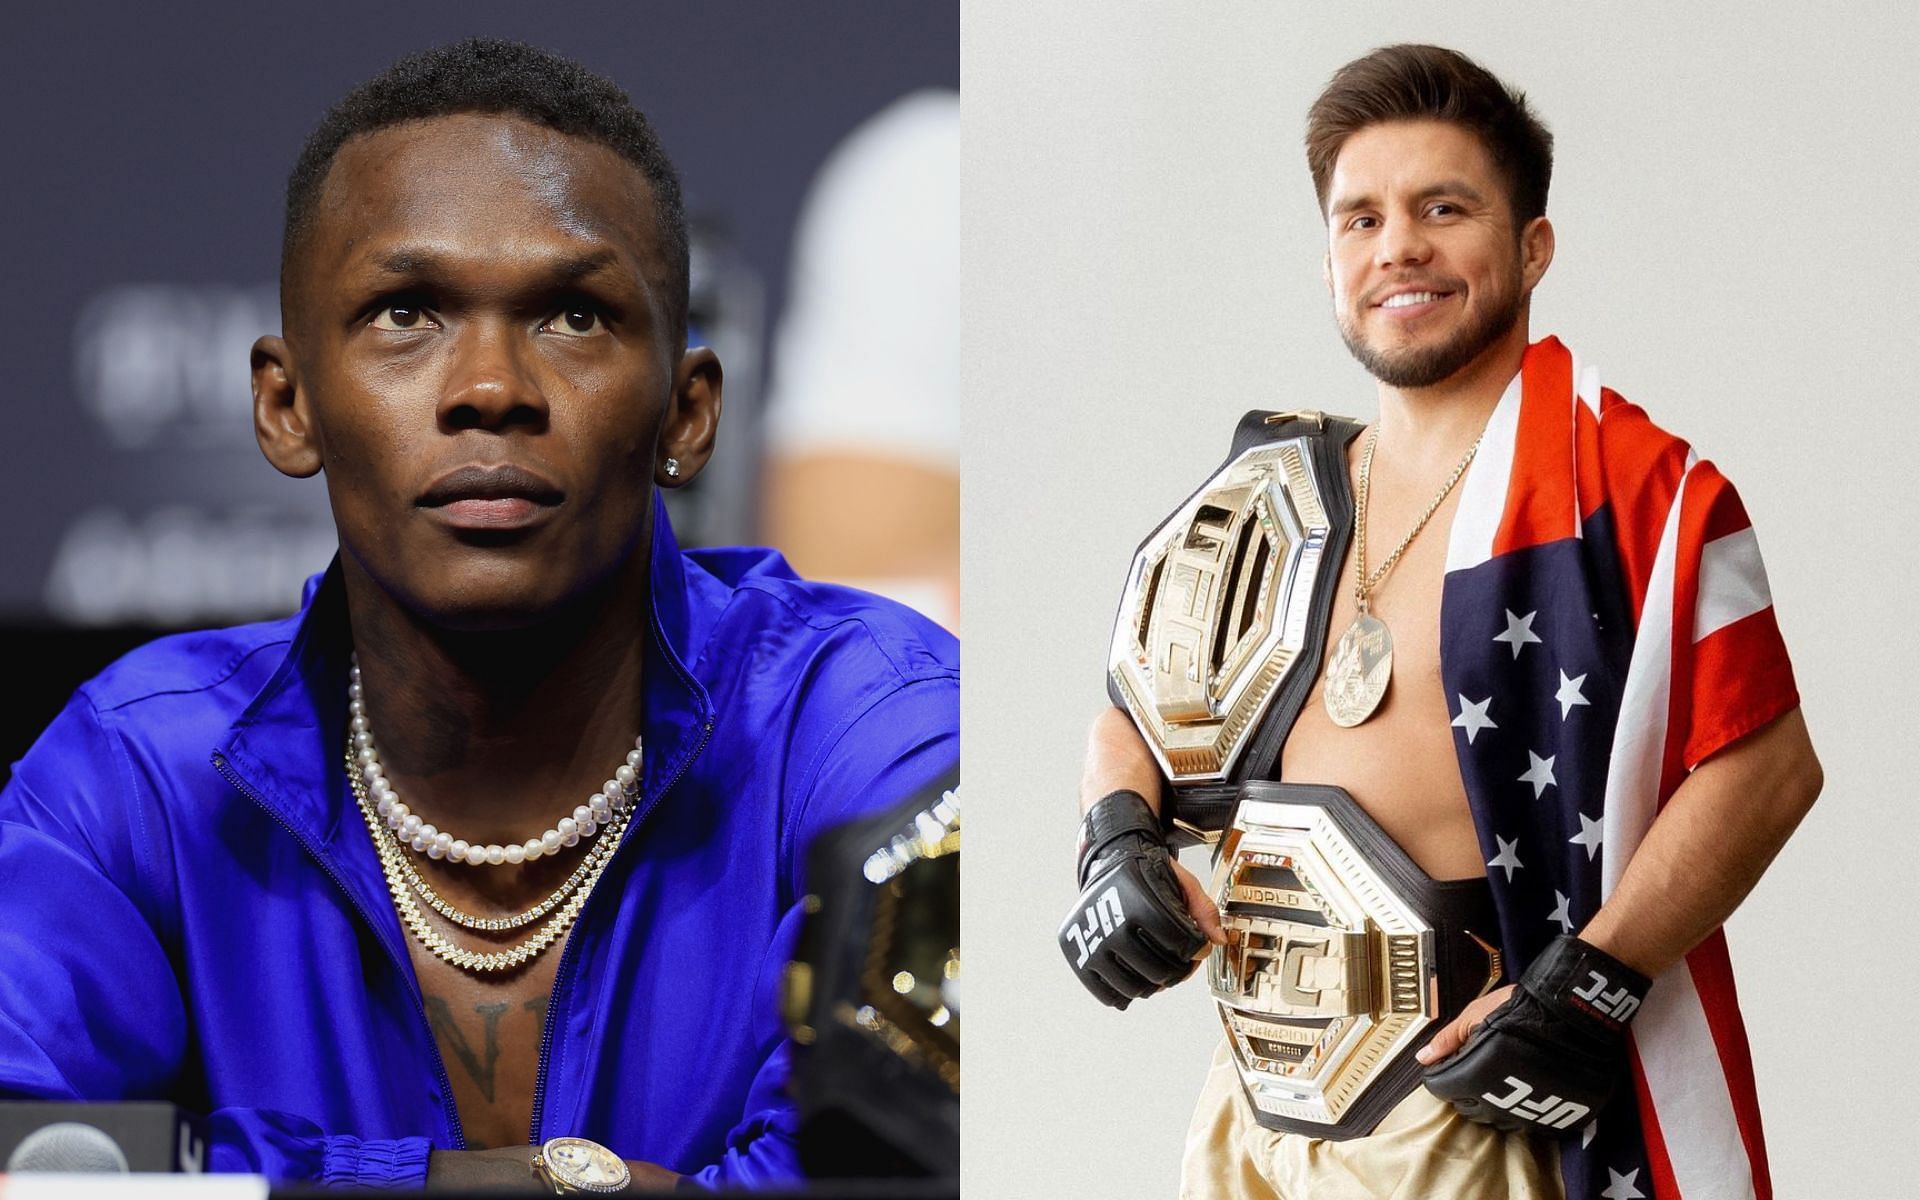 Adesanya and Cejudo (images courtesy of Getty and @henry_cejudo Instagram)